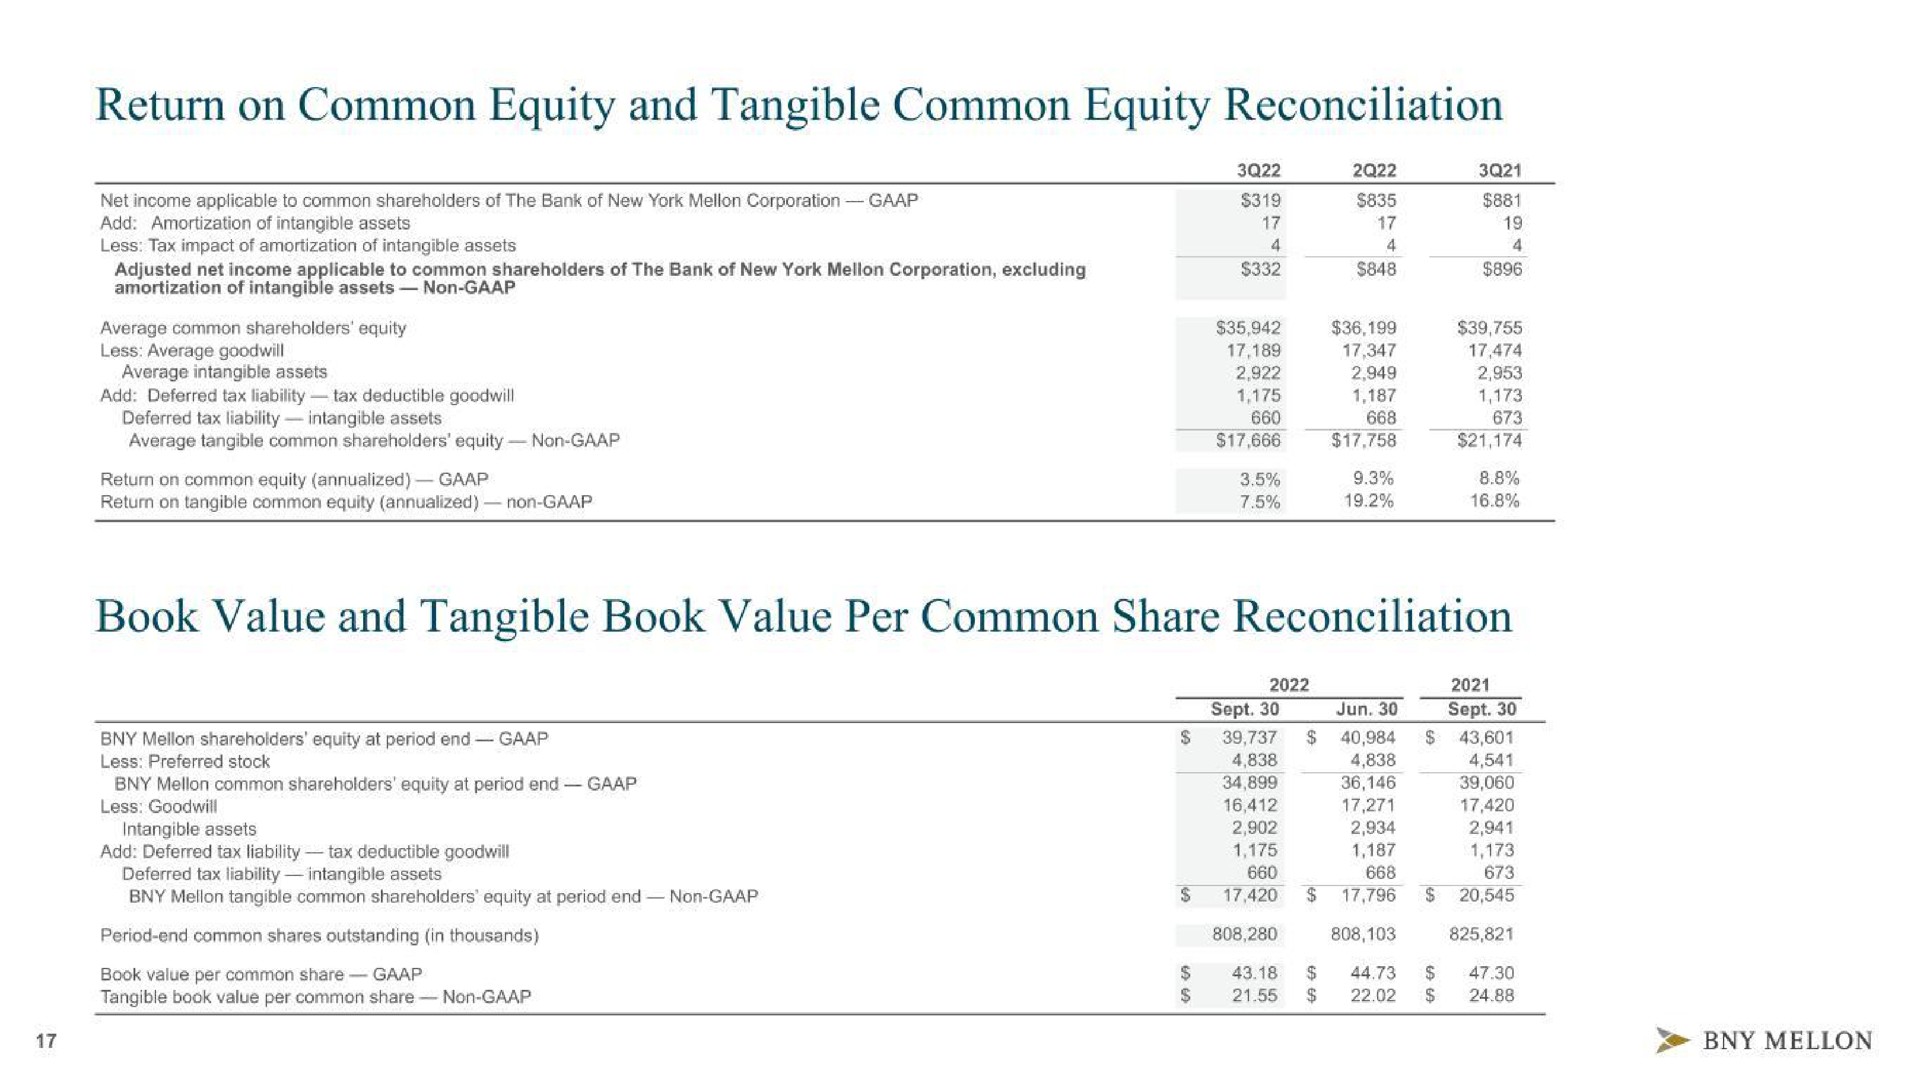 return on common equity and tangible common equity reconciliation men book value and tangible book value per common share reconciliation | BNY Mellon